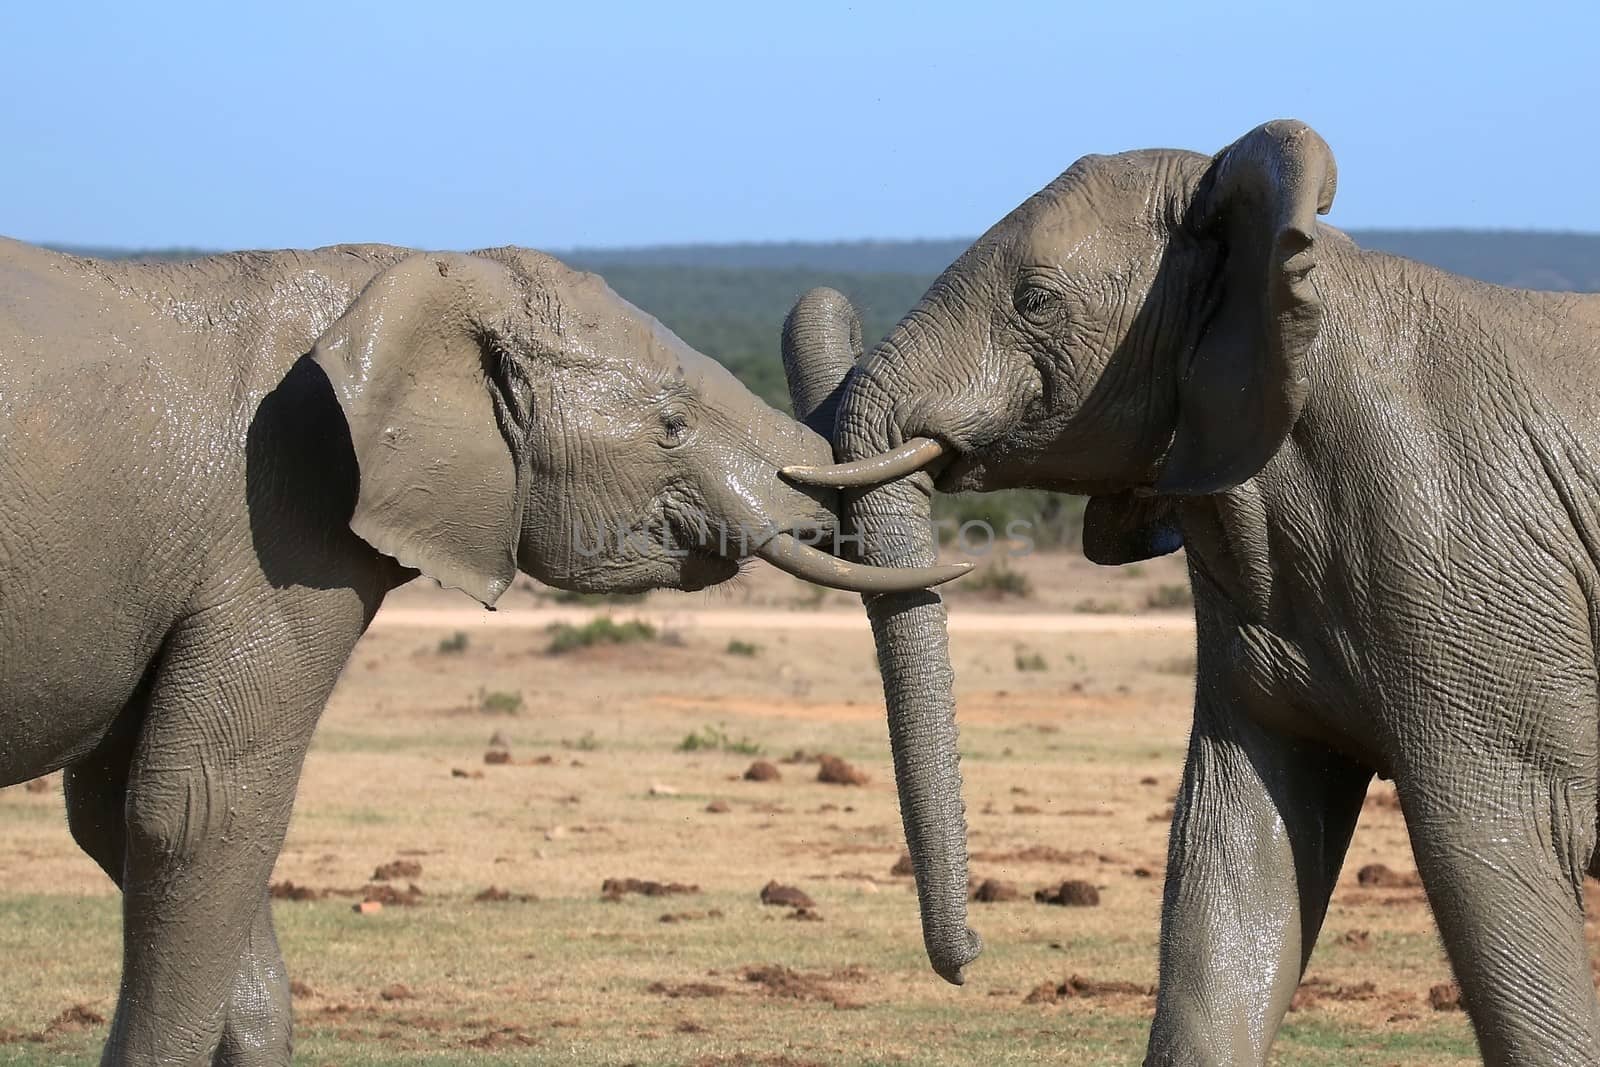 Two muddy African elephants testing each others strength